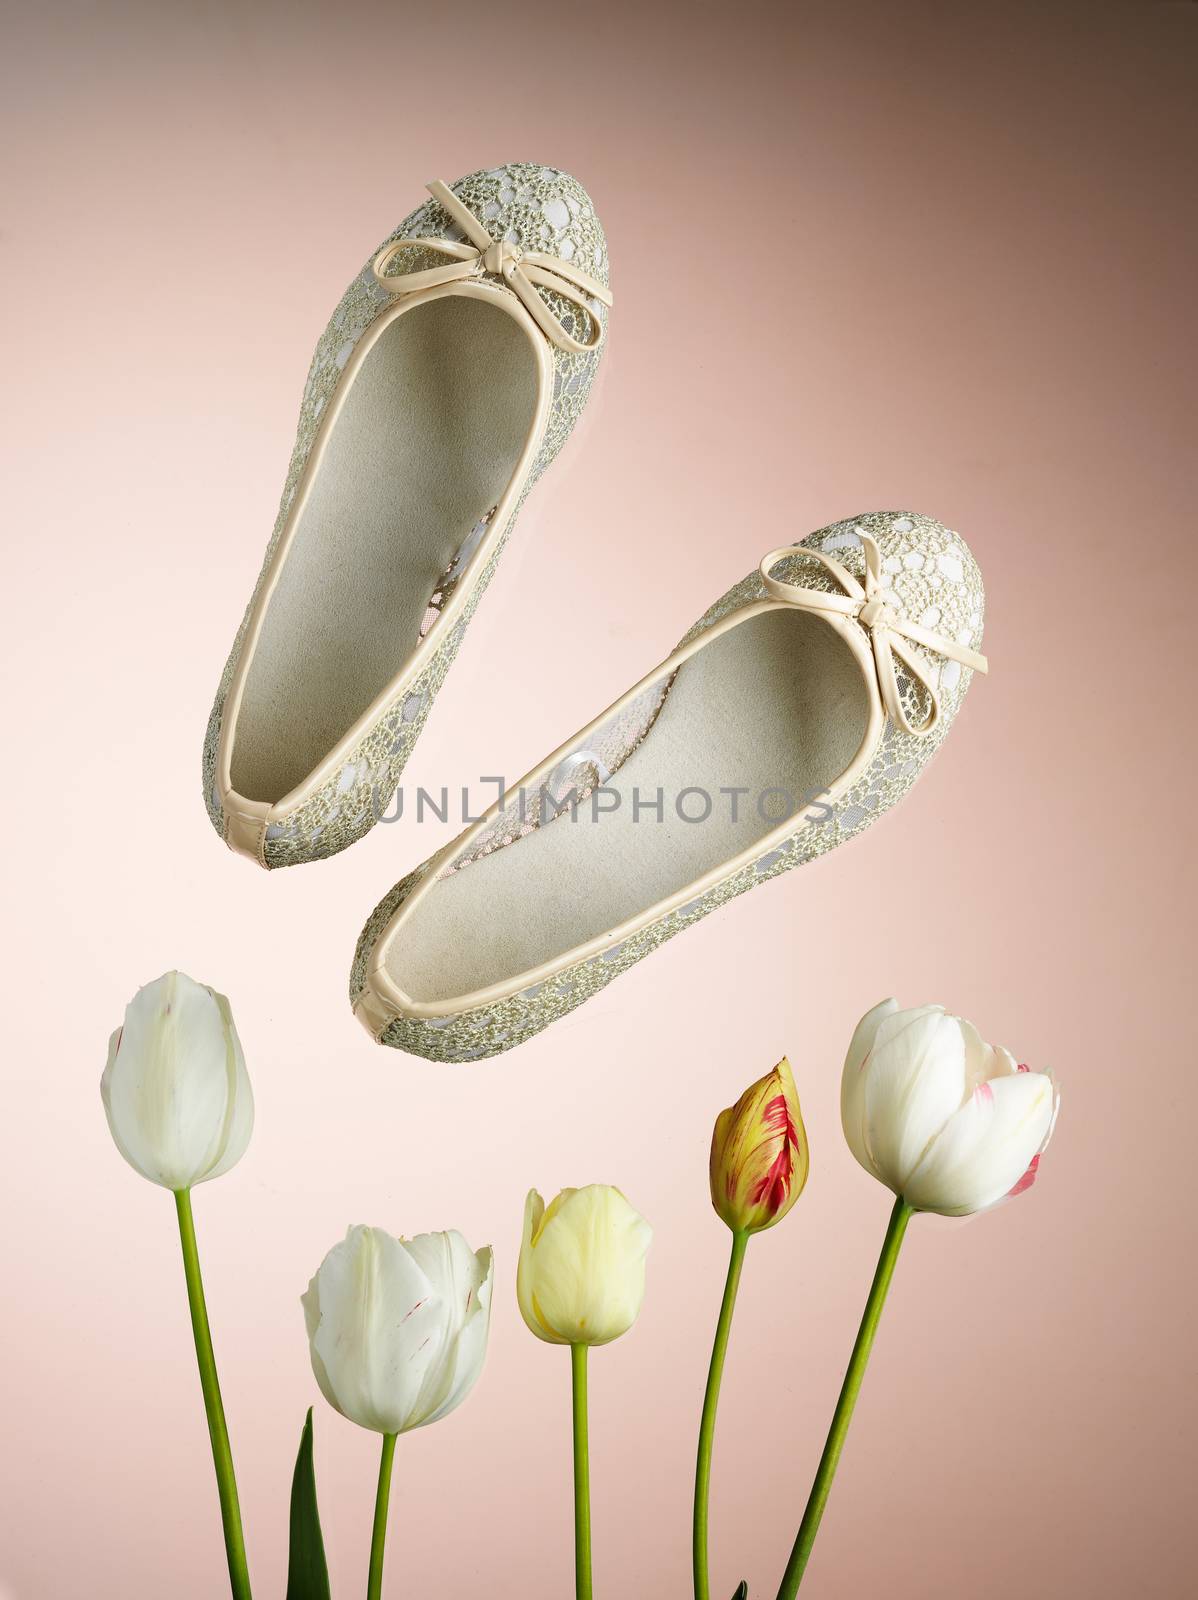 pair of 
summer season woman's shoes with tulips
